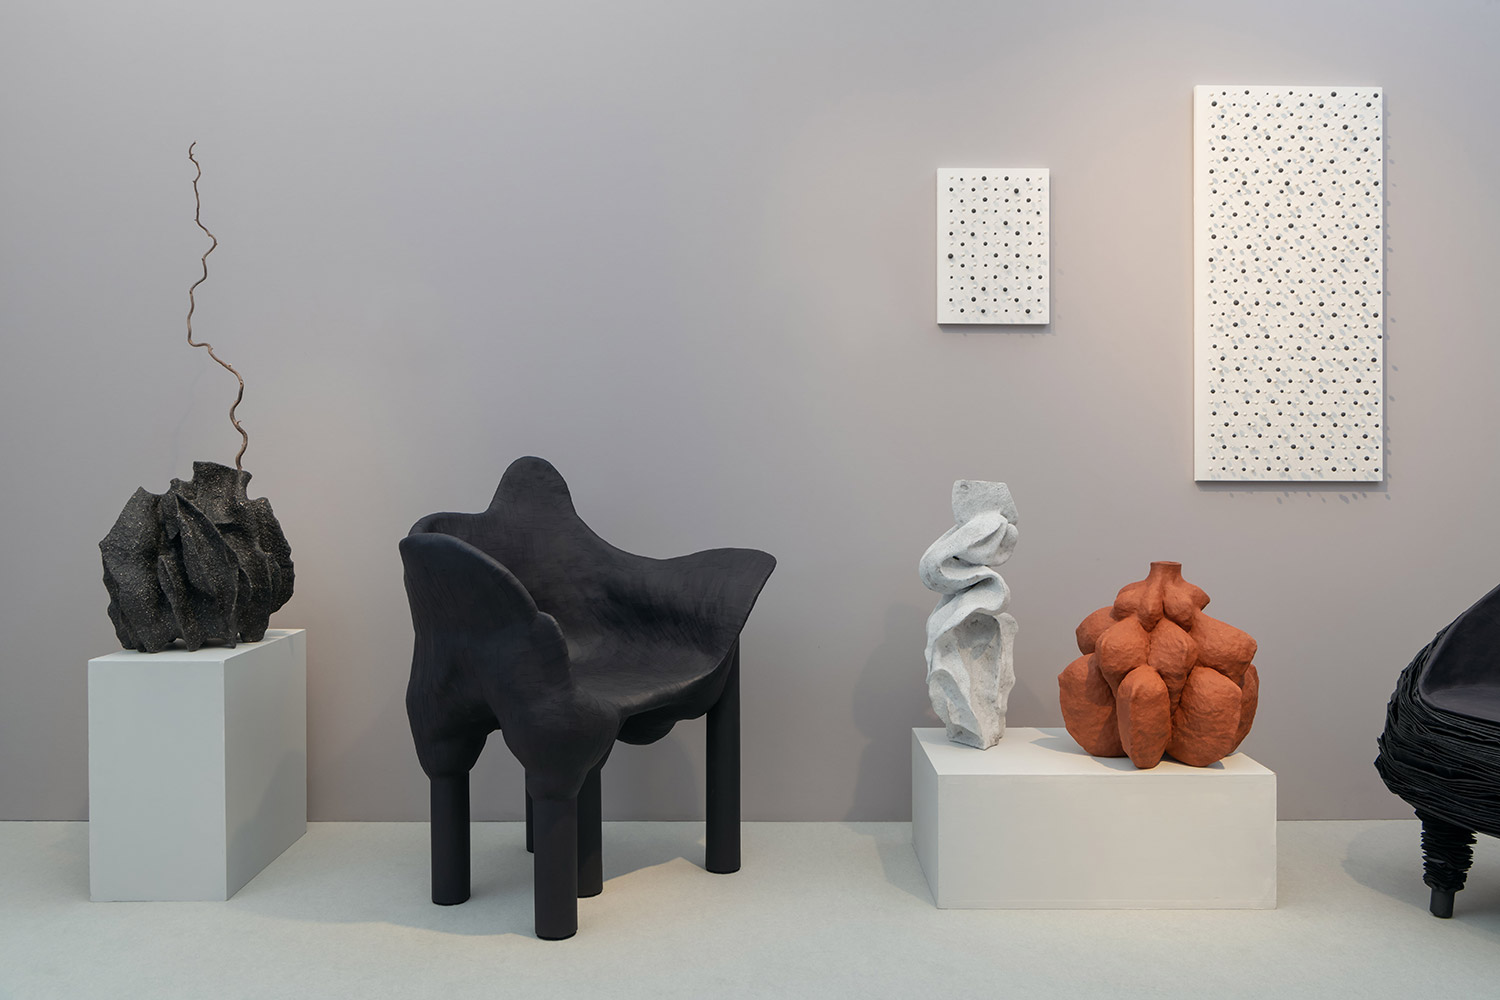 Sculptures on display at the gallery’s booth